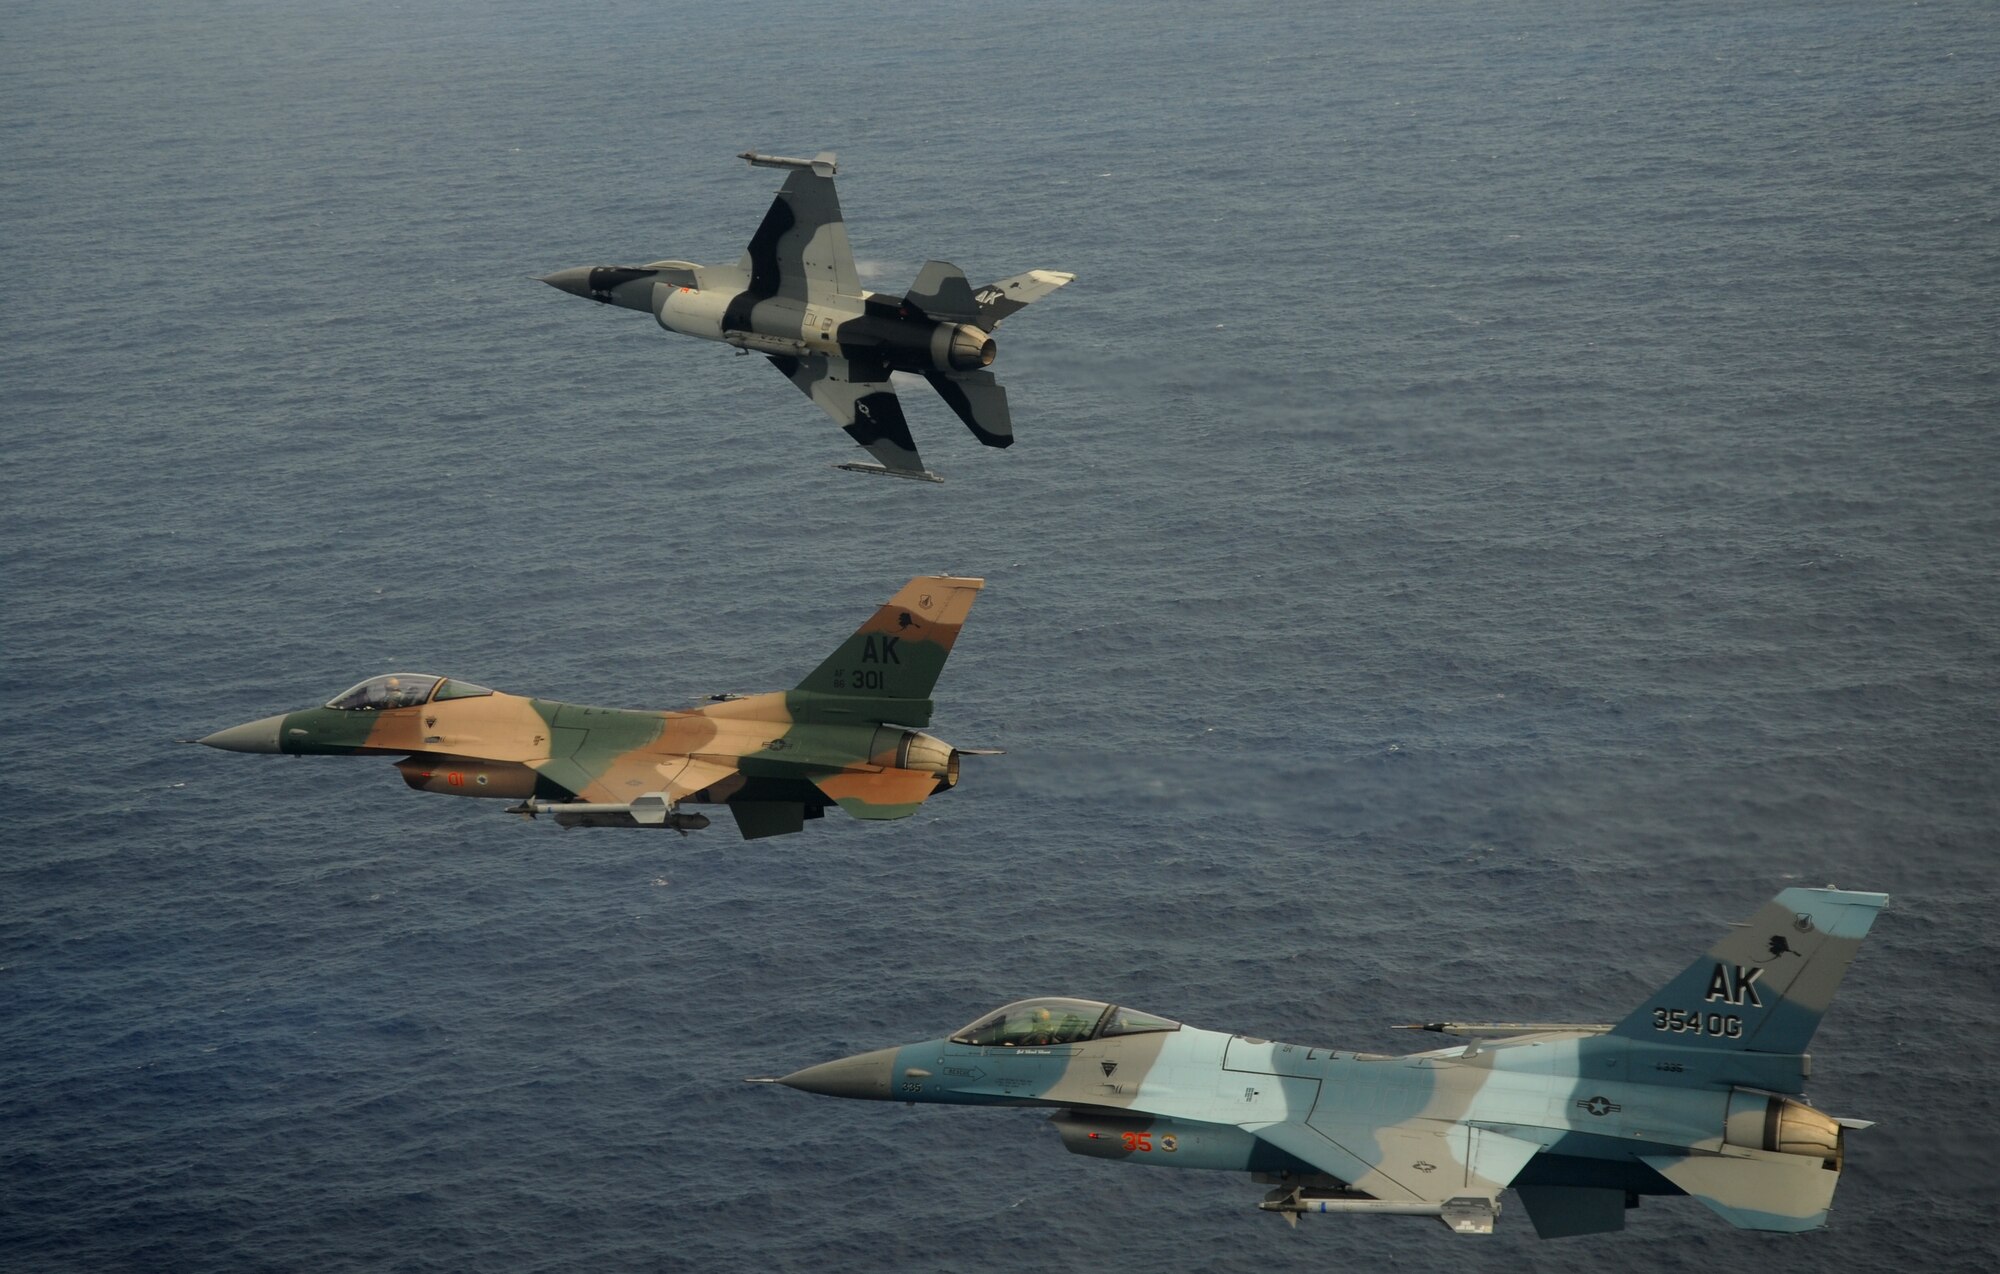 A 3-ship of F-16 Fighting Falcons, 18th Aggressor Squadron, Eielson Air Force Base, Alaska, fly over the Pacific Ocean during exercise Cope North 09-1, Feb. 10. Units from the U.S. Air Force, U.S. Navy, and the Japan Air Self Defense Force are participating in exercise Cope North at Andersen AFB, Guam from 2-13 Feb.  Cope North 09-1 is the first iteration of a regularly scheduled joint and bilateral exercise and is part of the on-going series of exercises designed to enhance air operations in defense of Japan.(U.S. Air Force photo/ Master Sgt. Kevin J. Gruenwald) released      